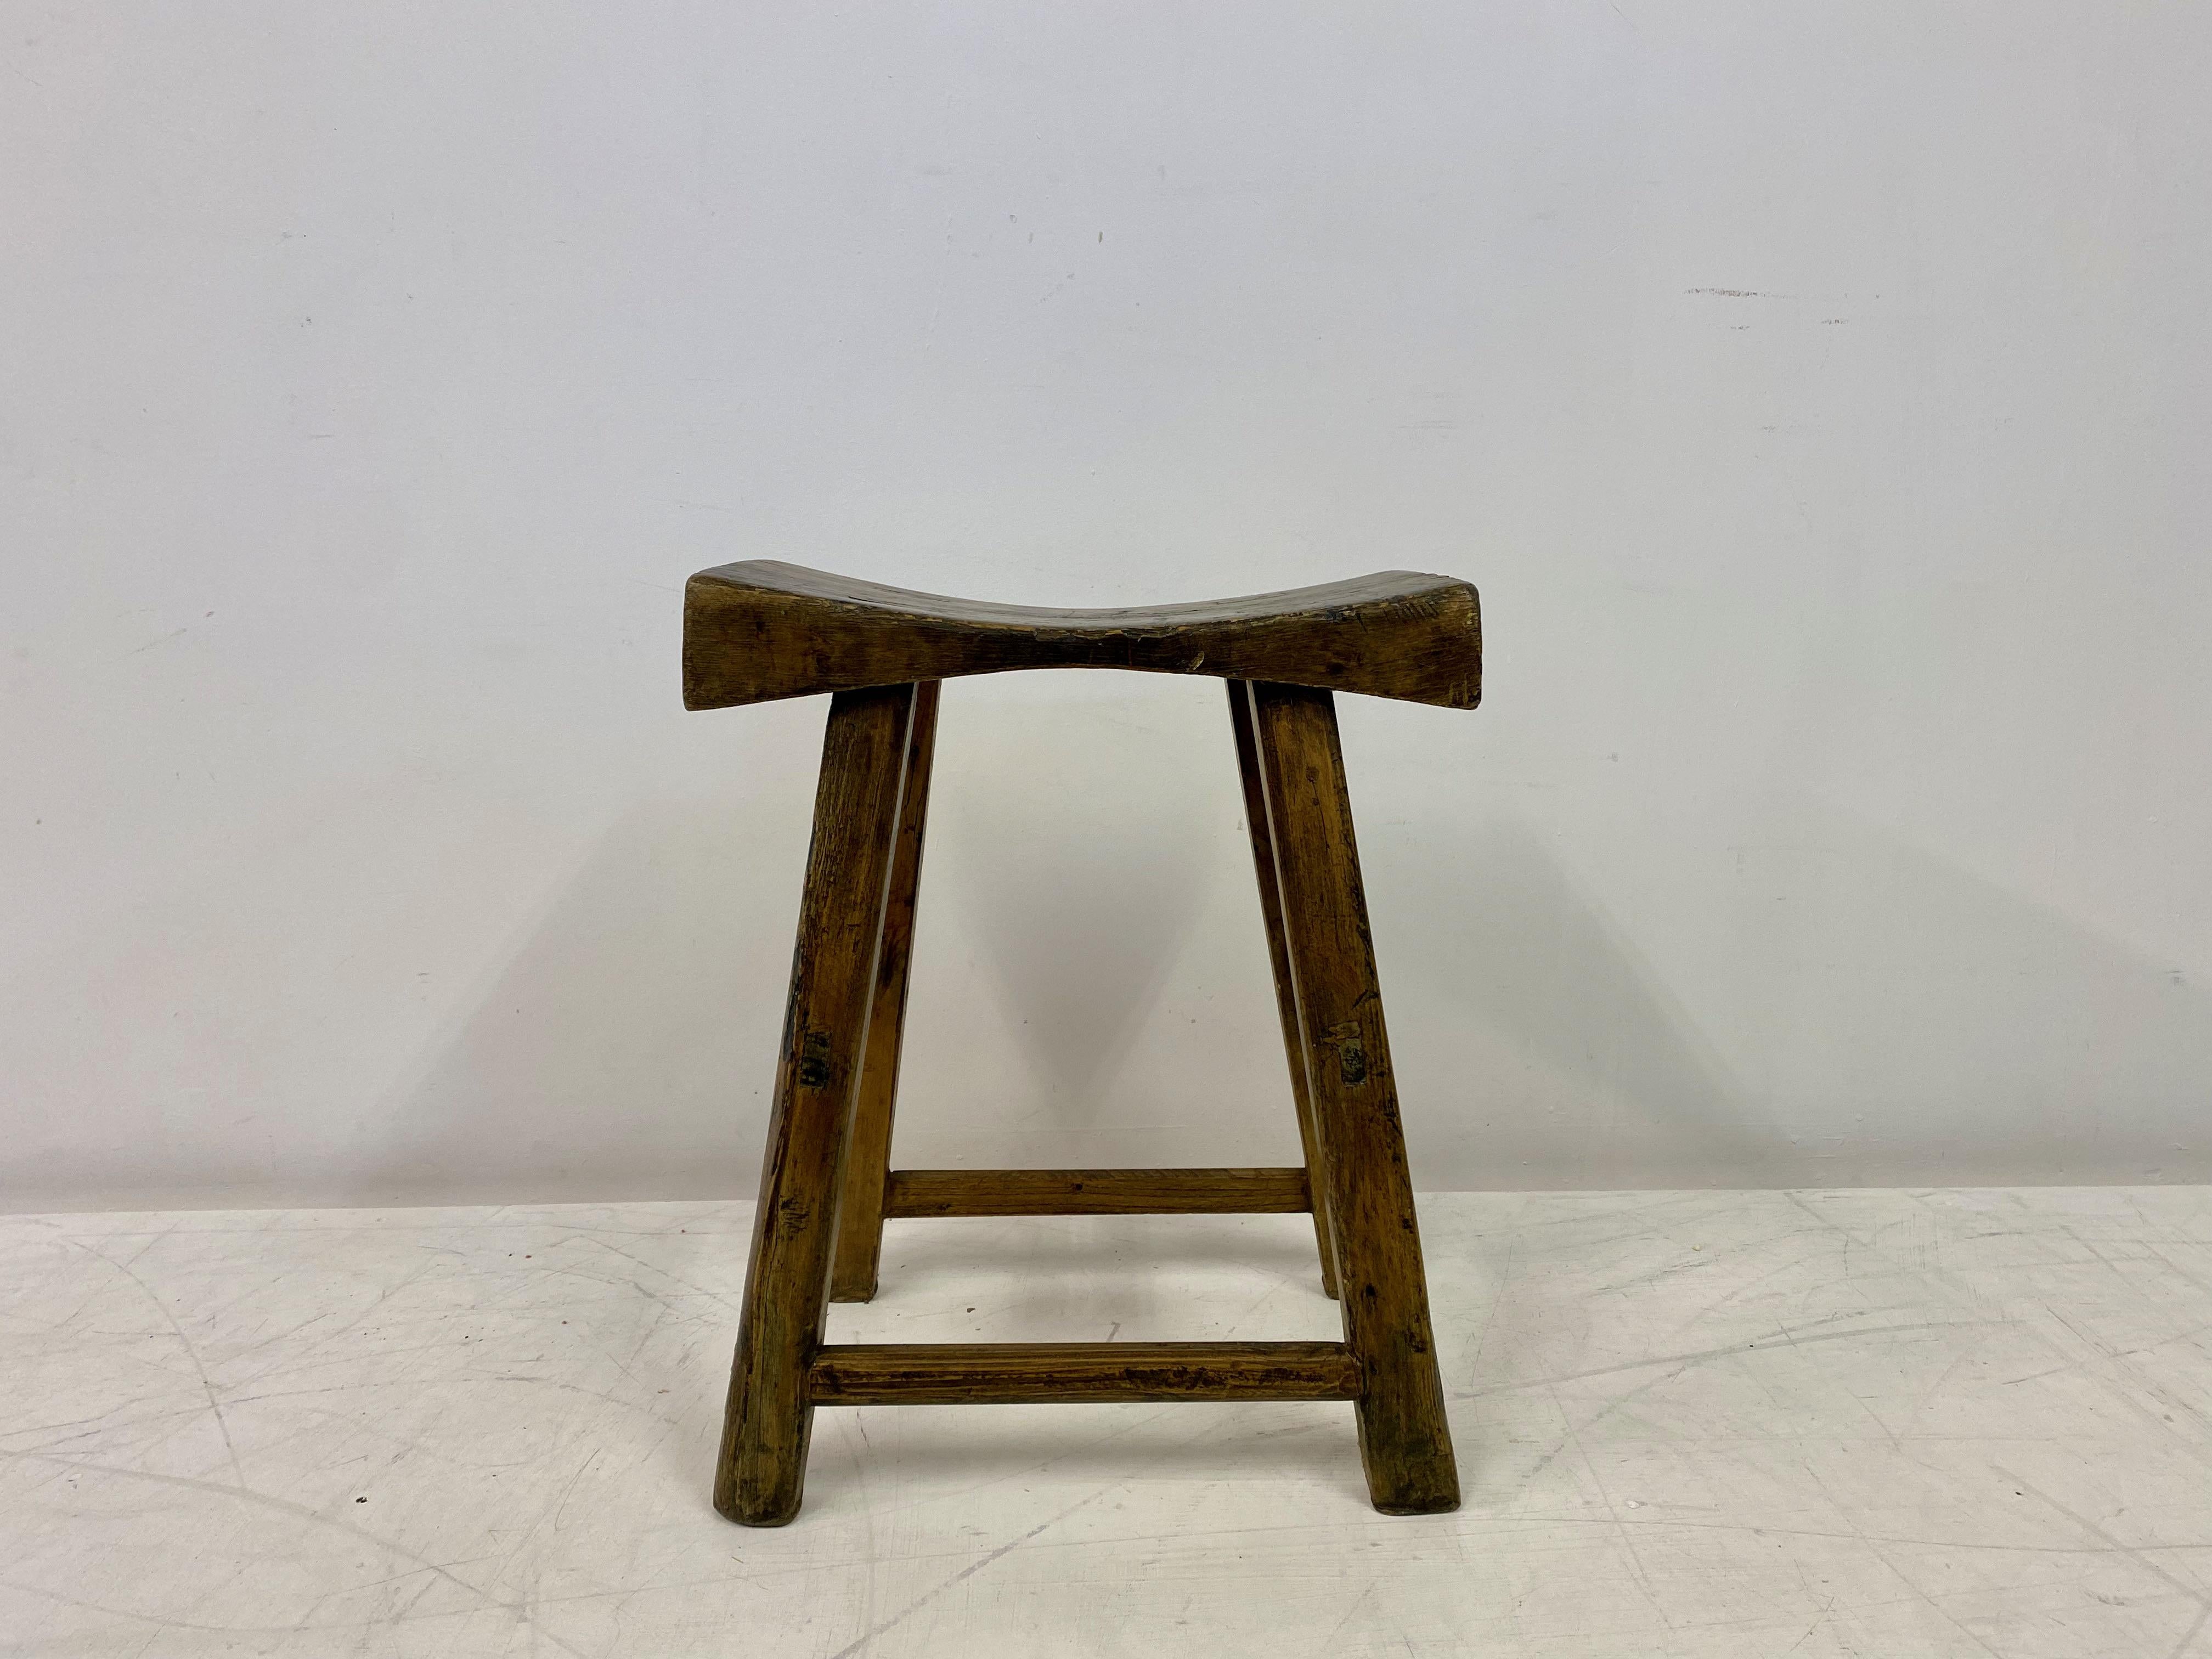 Rustic stool

Elm

Visible joints

Great patina

19th century or earlier.